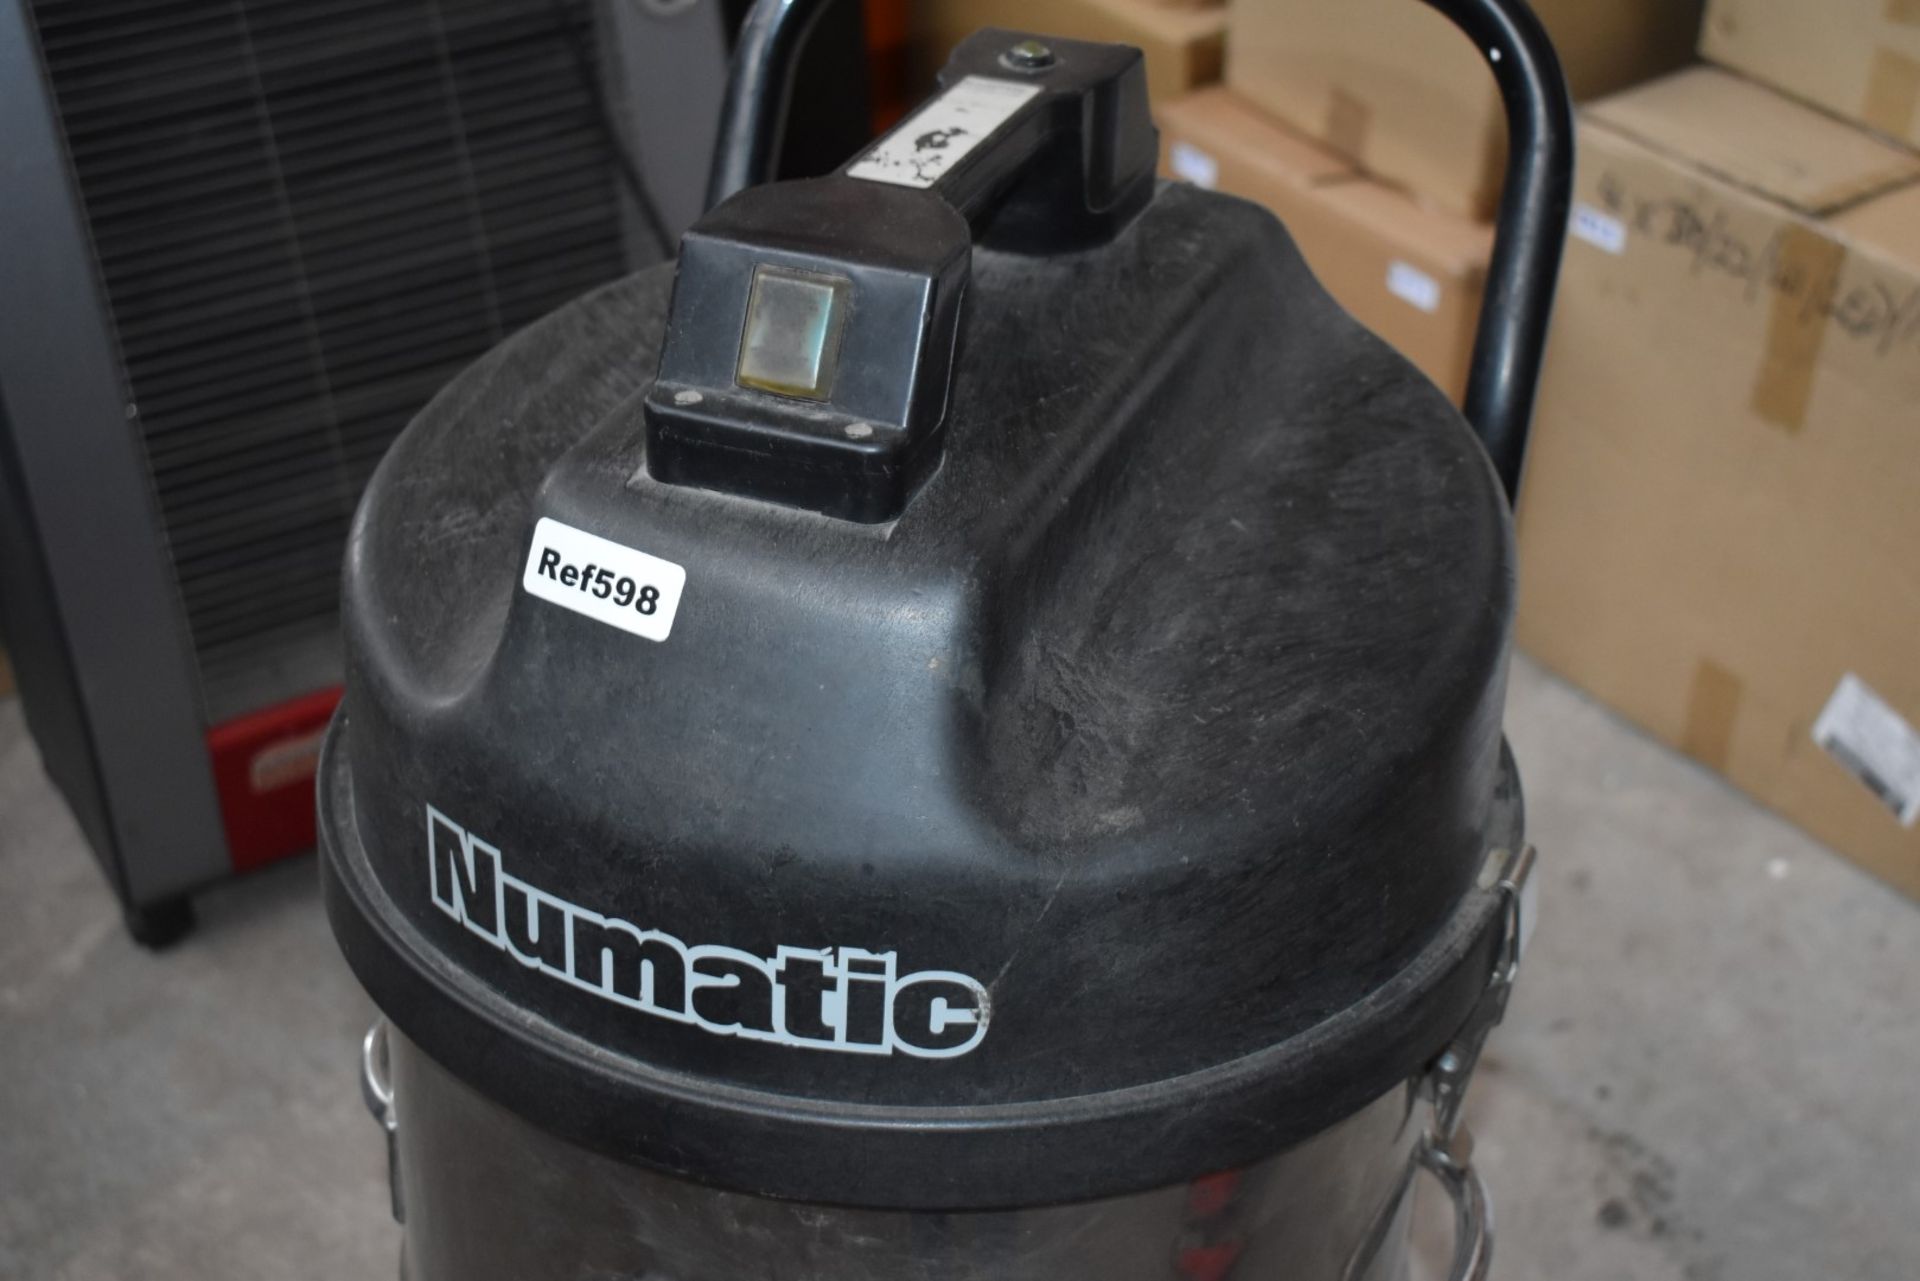 1 x Numatic WVDB750 Battery Powered Wet & Dry Vacuum Cleaner With Stainless Steel Body - Image 2 of 7